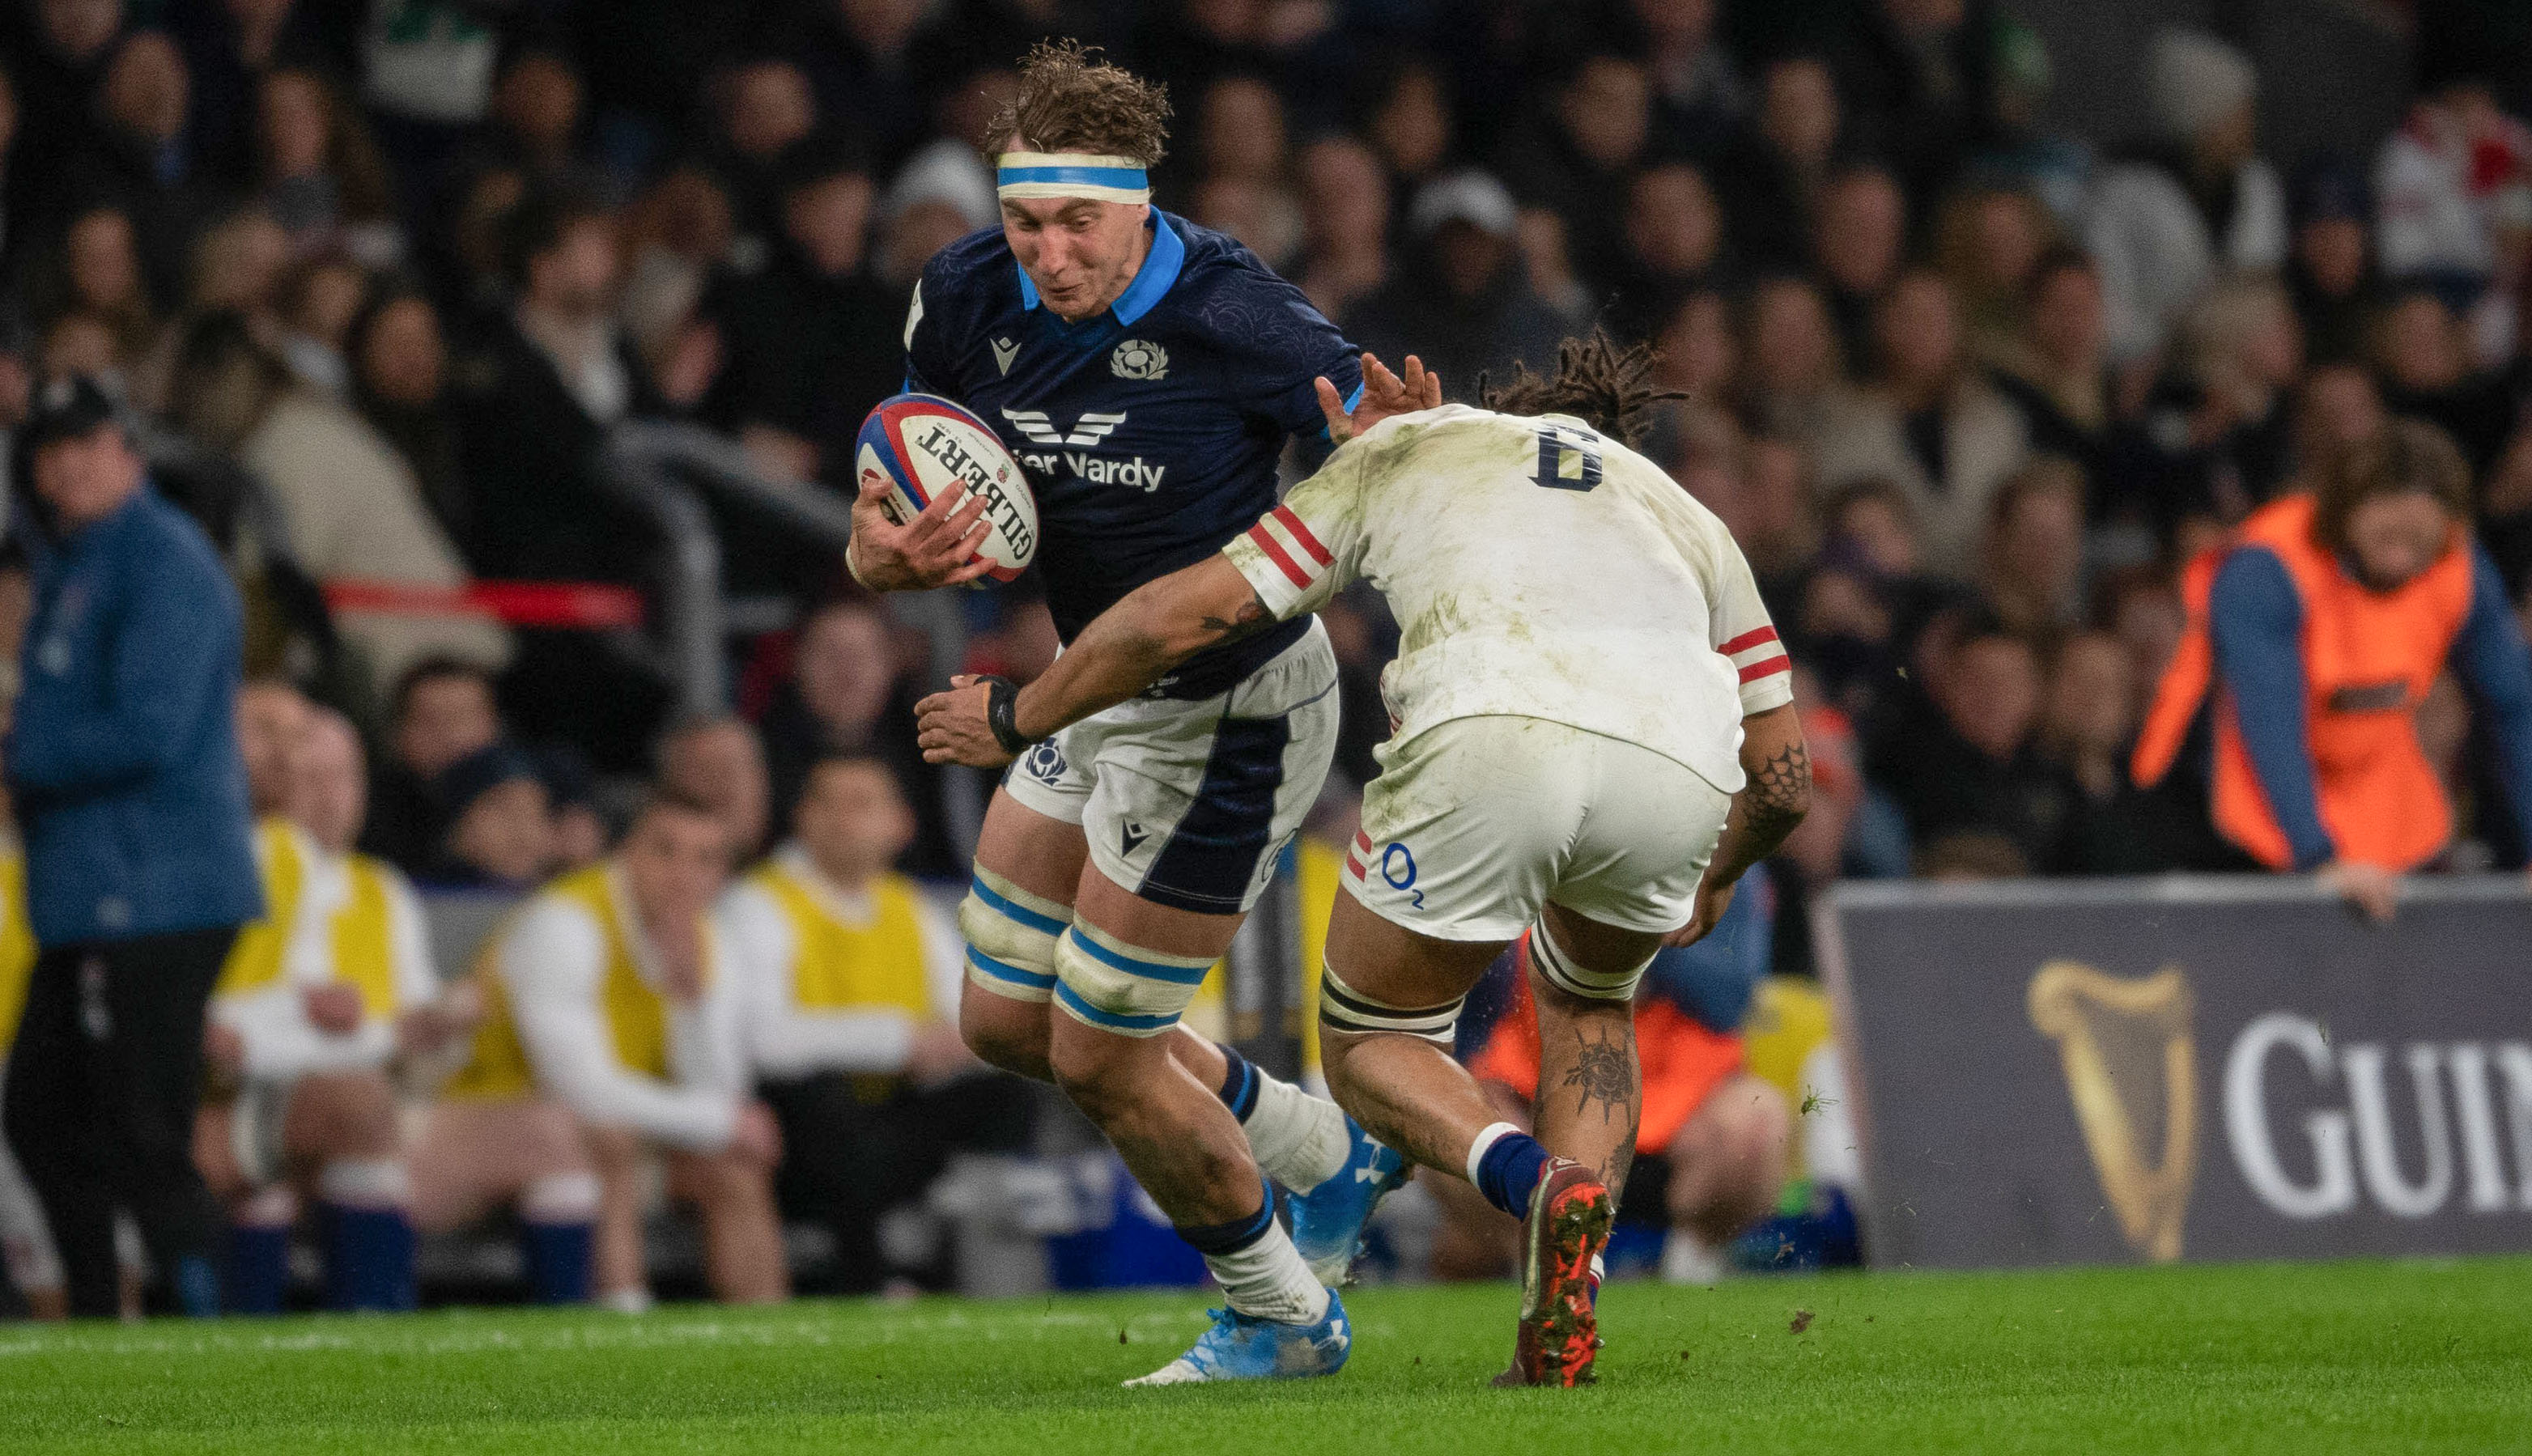 Scotland's Jamie Ritchie is tackled by England's Lewis Ludlam.